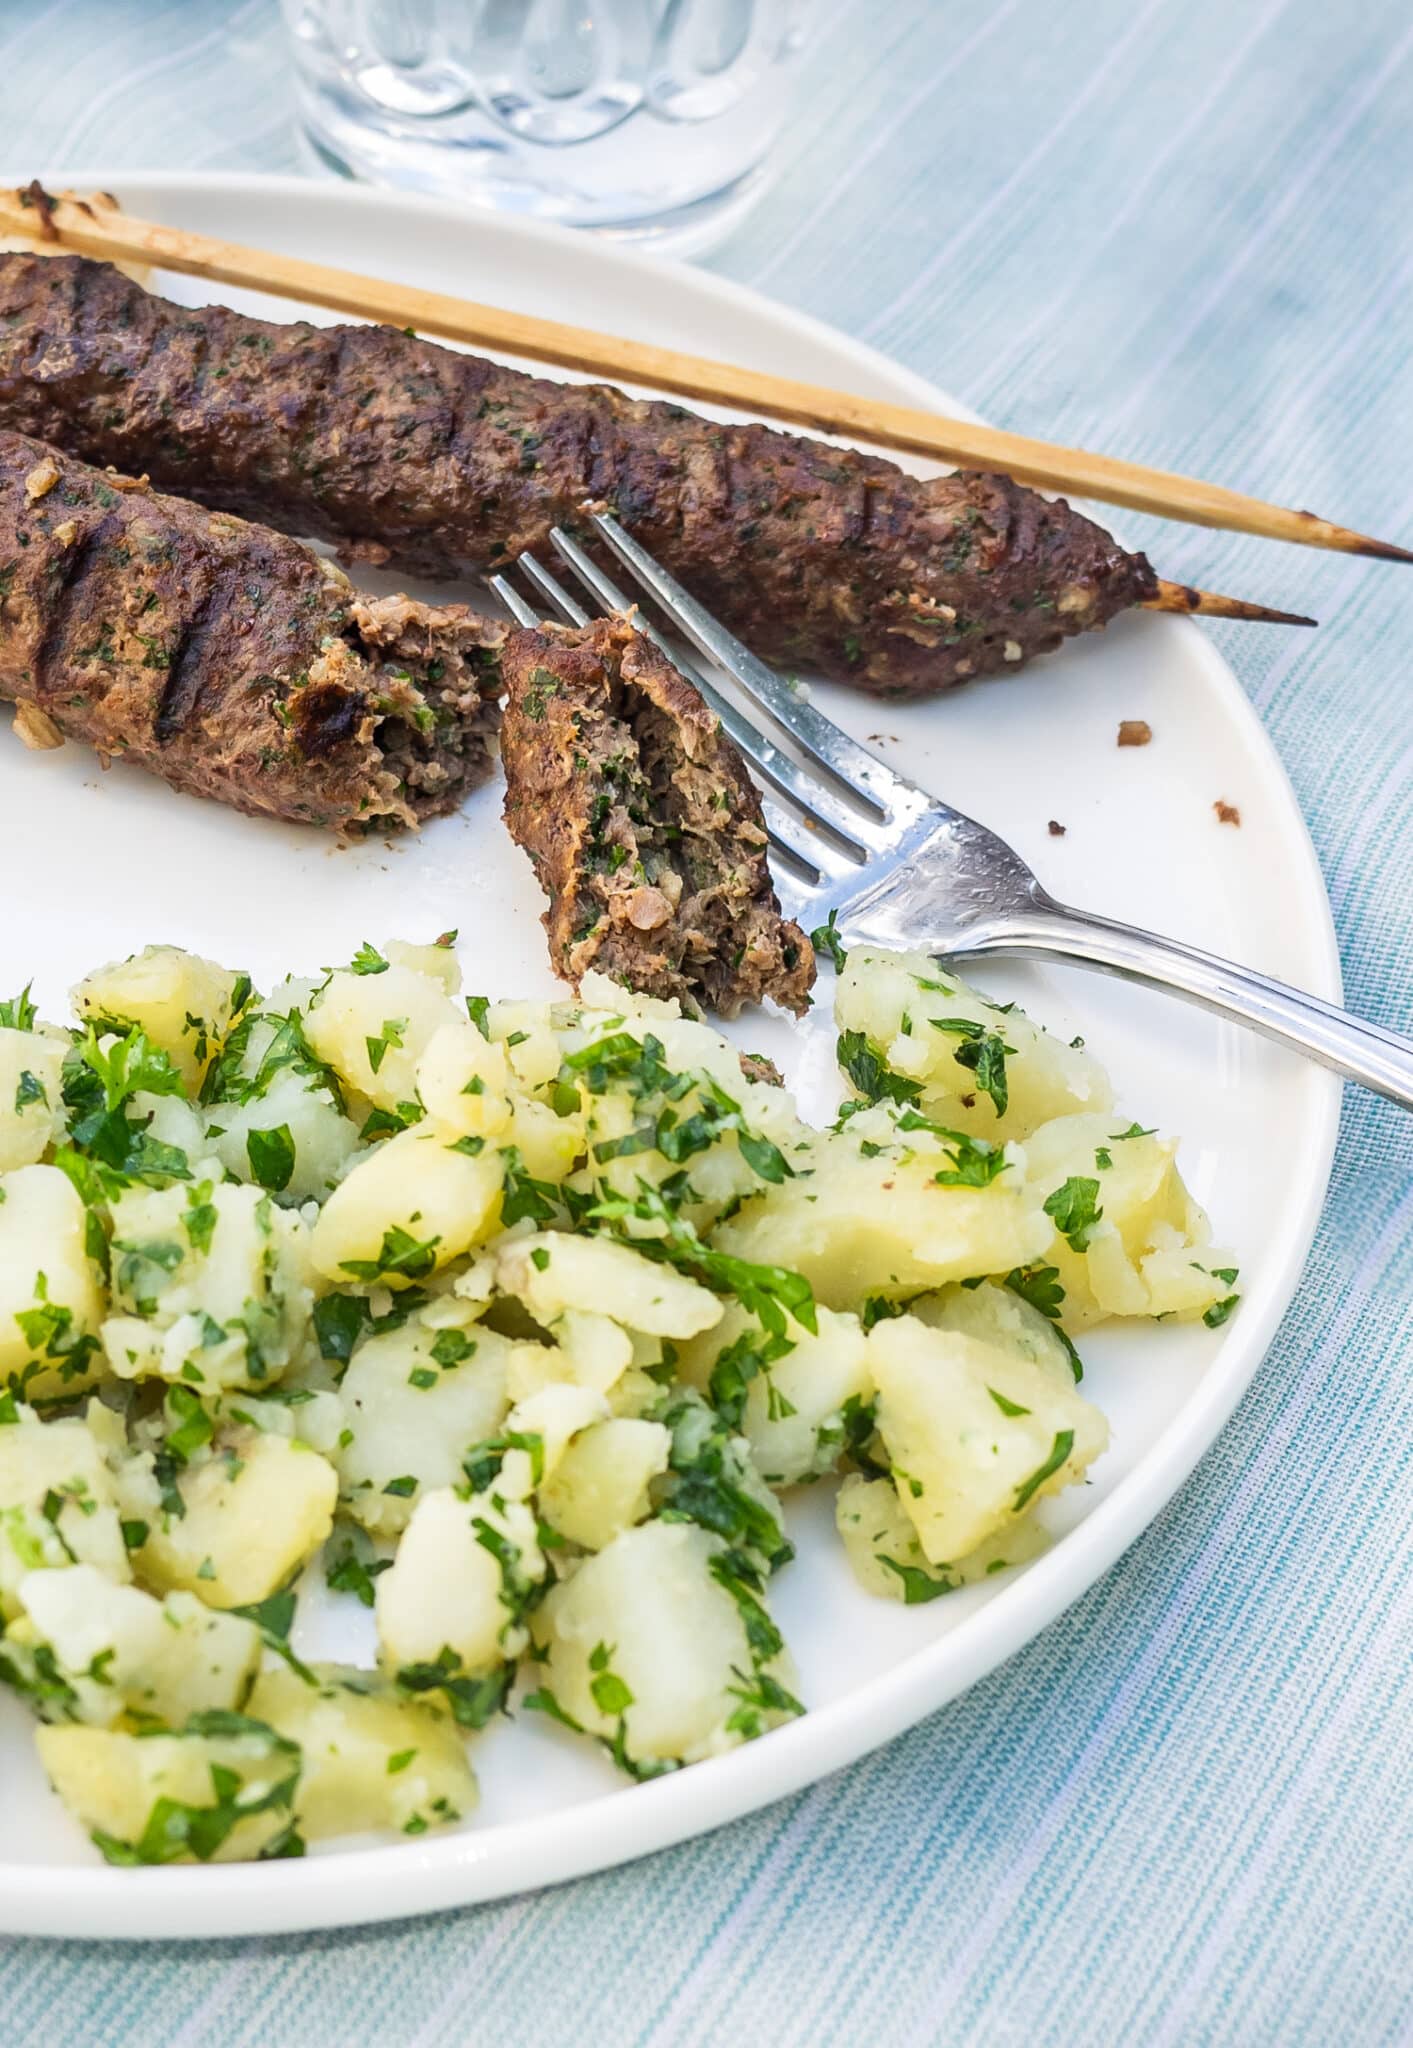 Plate of grilled beef kebabs served with potato salad.